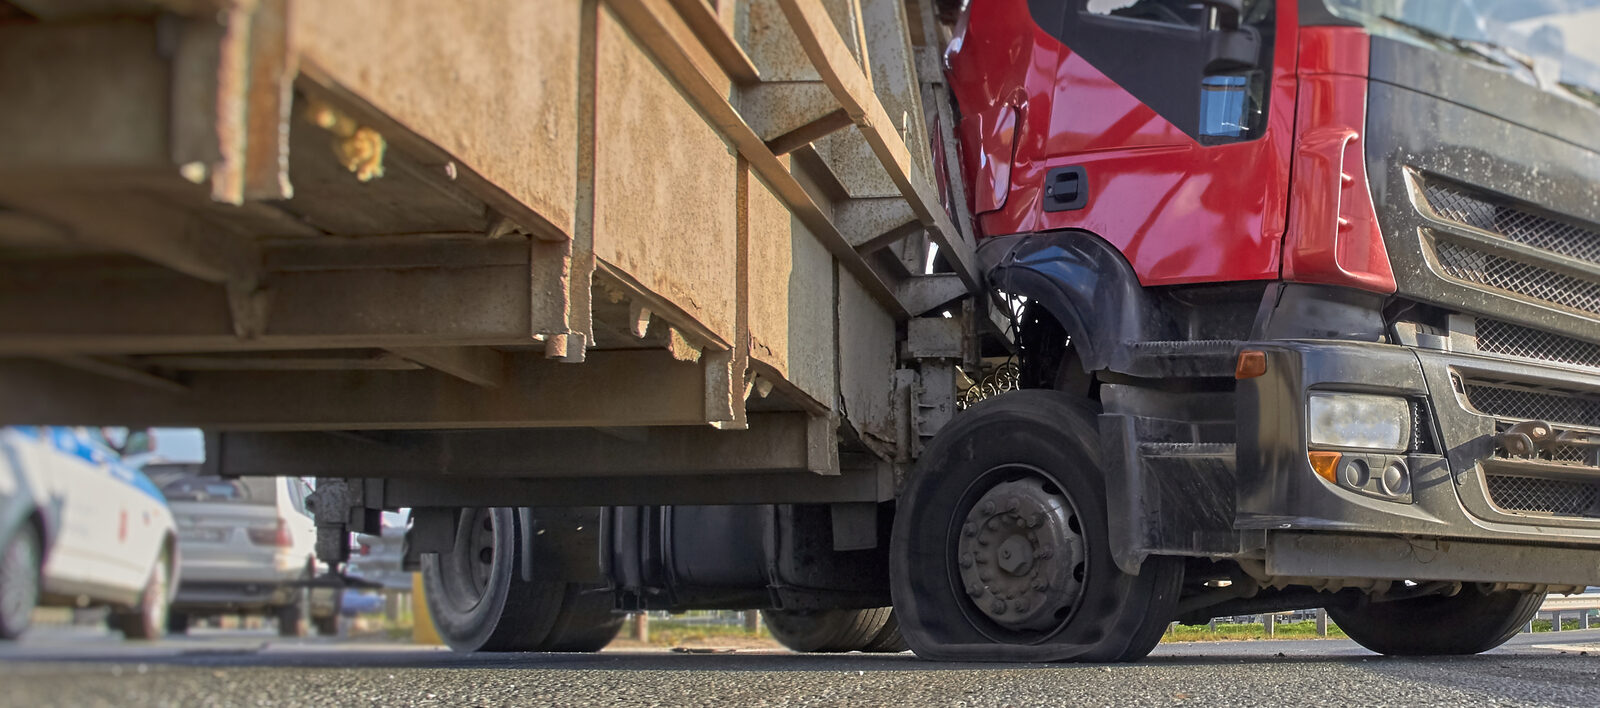 Truck Accident Law Firm for Illinois Cases | Decatur, IL Truck Crash Attorneys | Burger Law